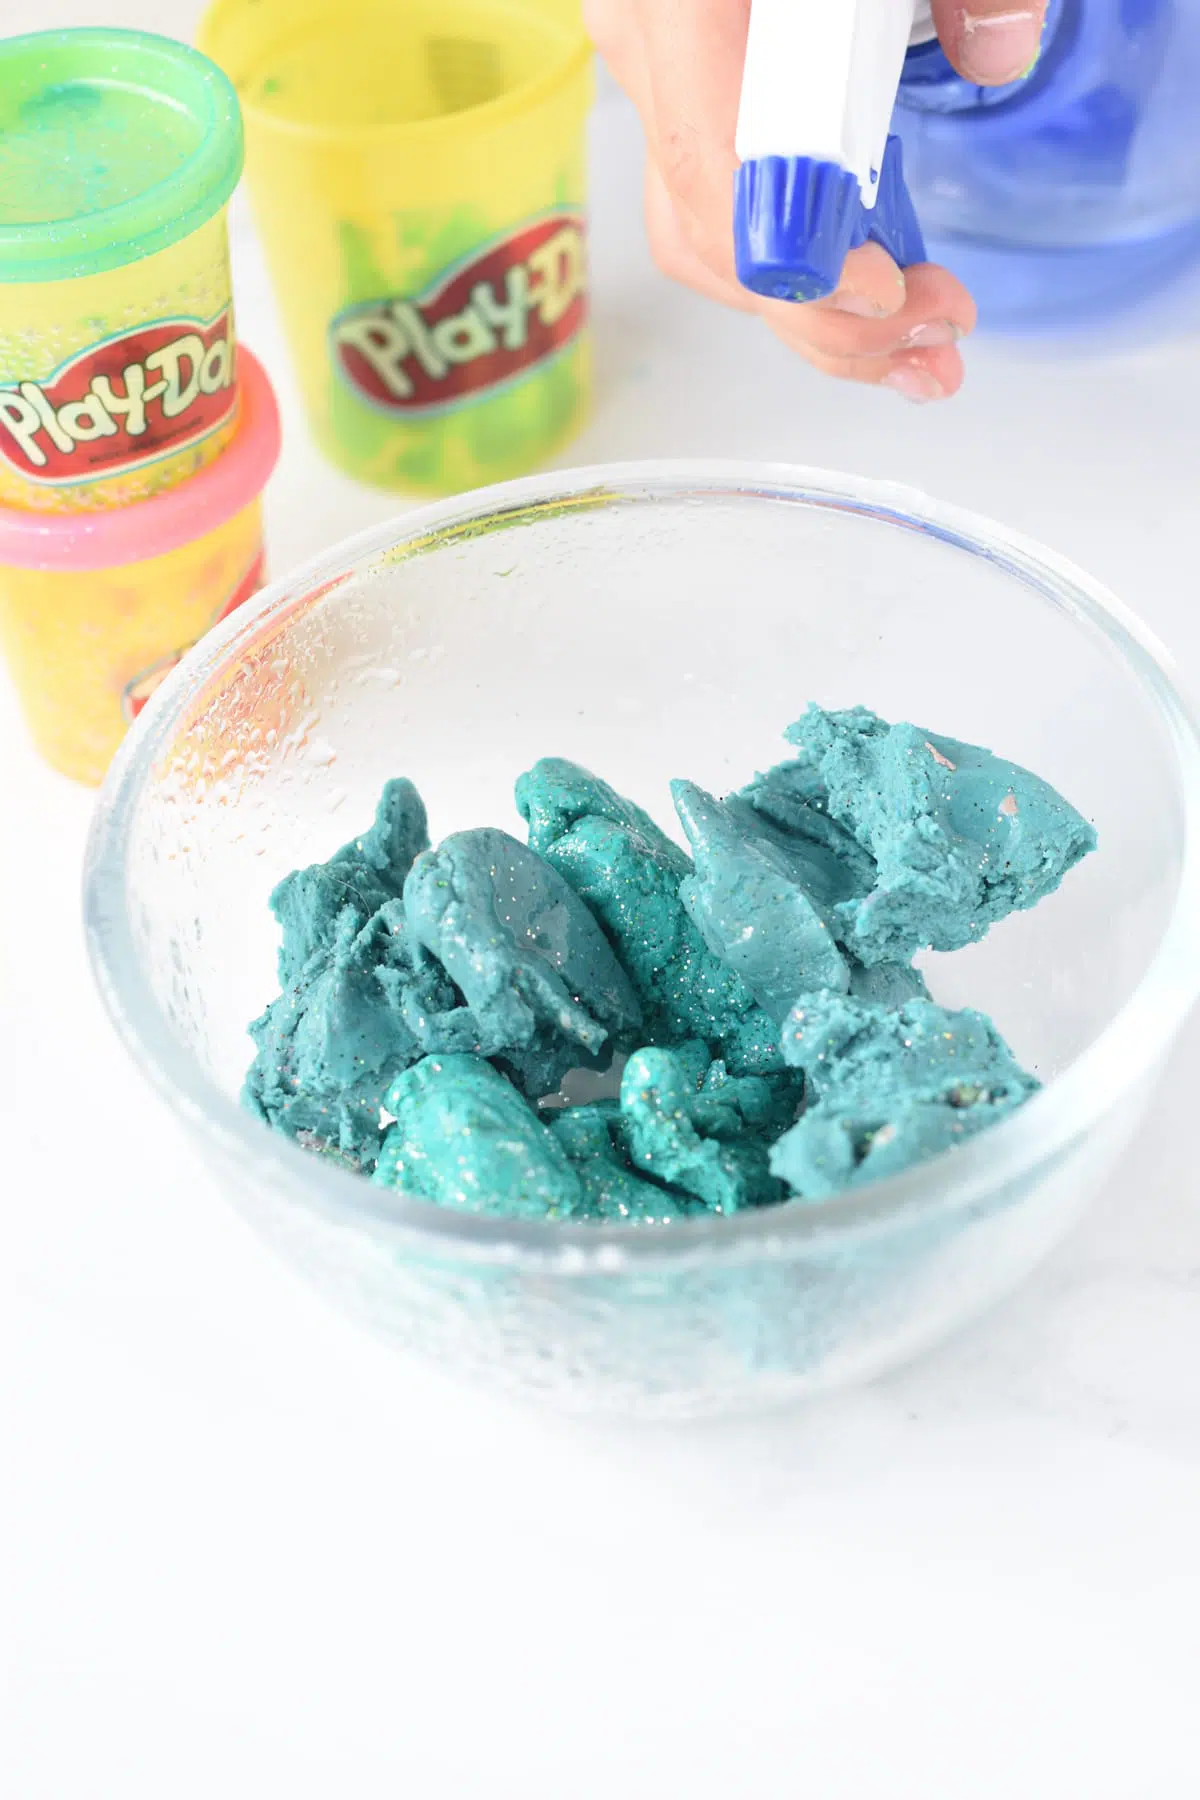 How to fix old playdough